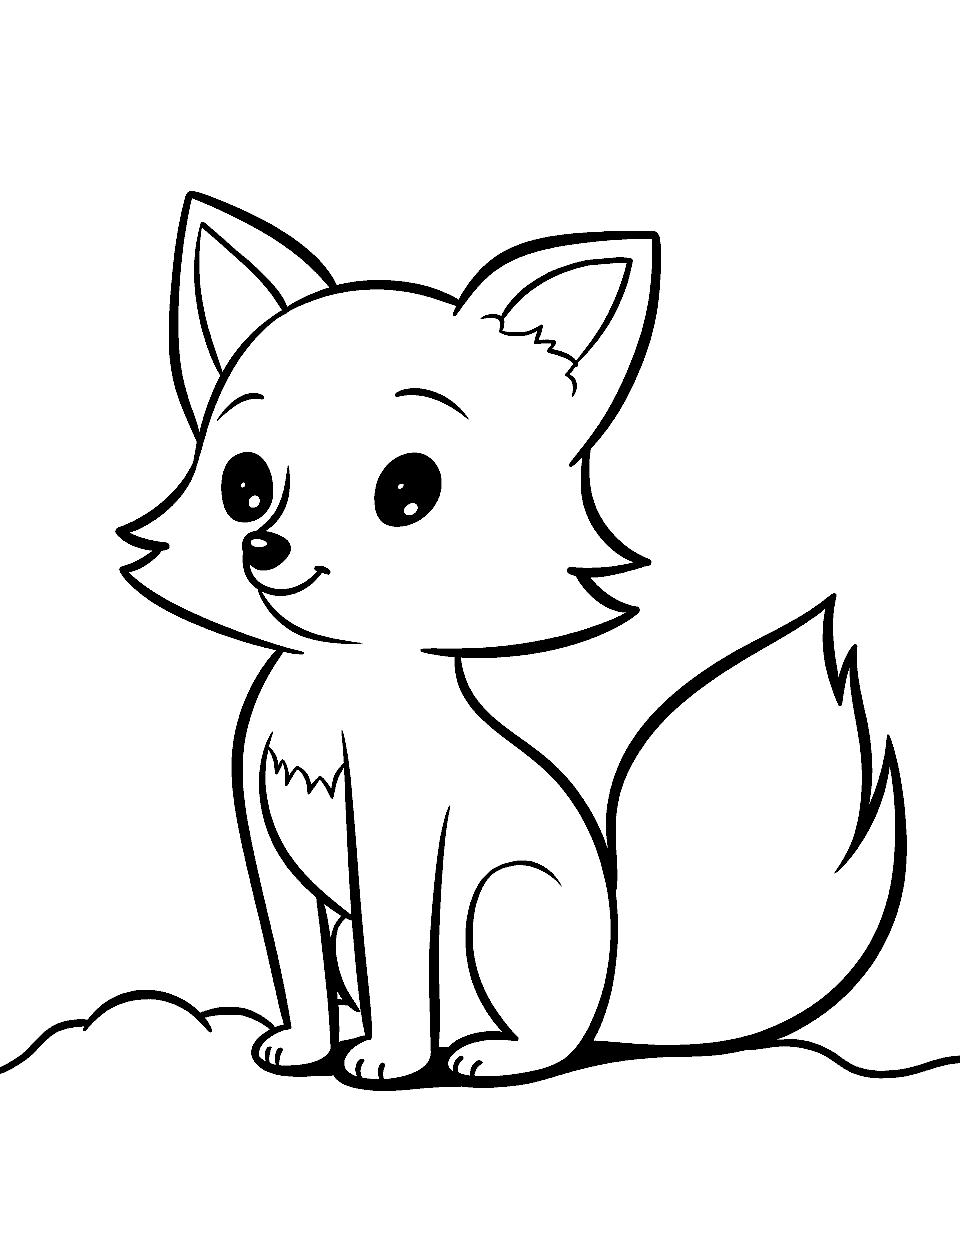 Easy and Simple Fox Coloring Page - A basic outline of a fox, ideal for young kids or beginners.